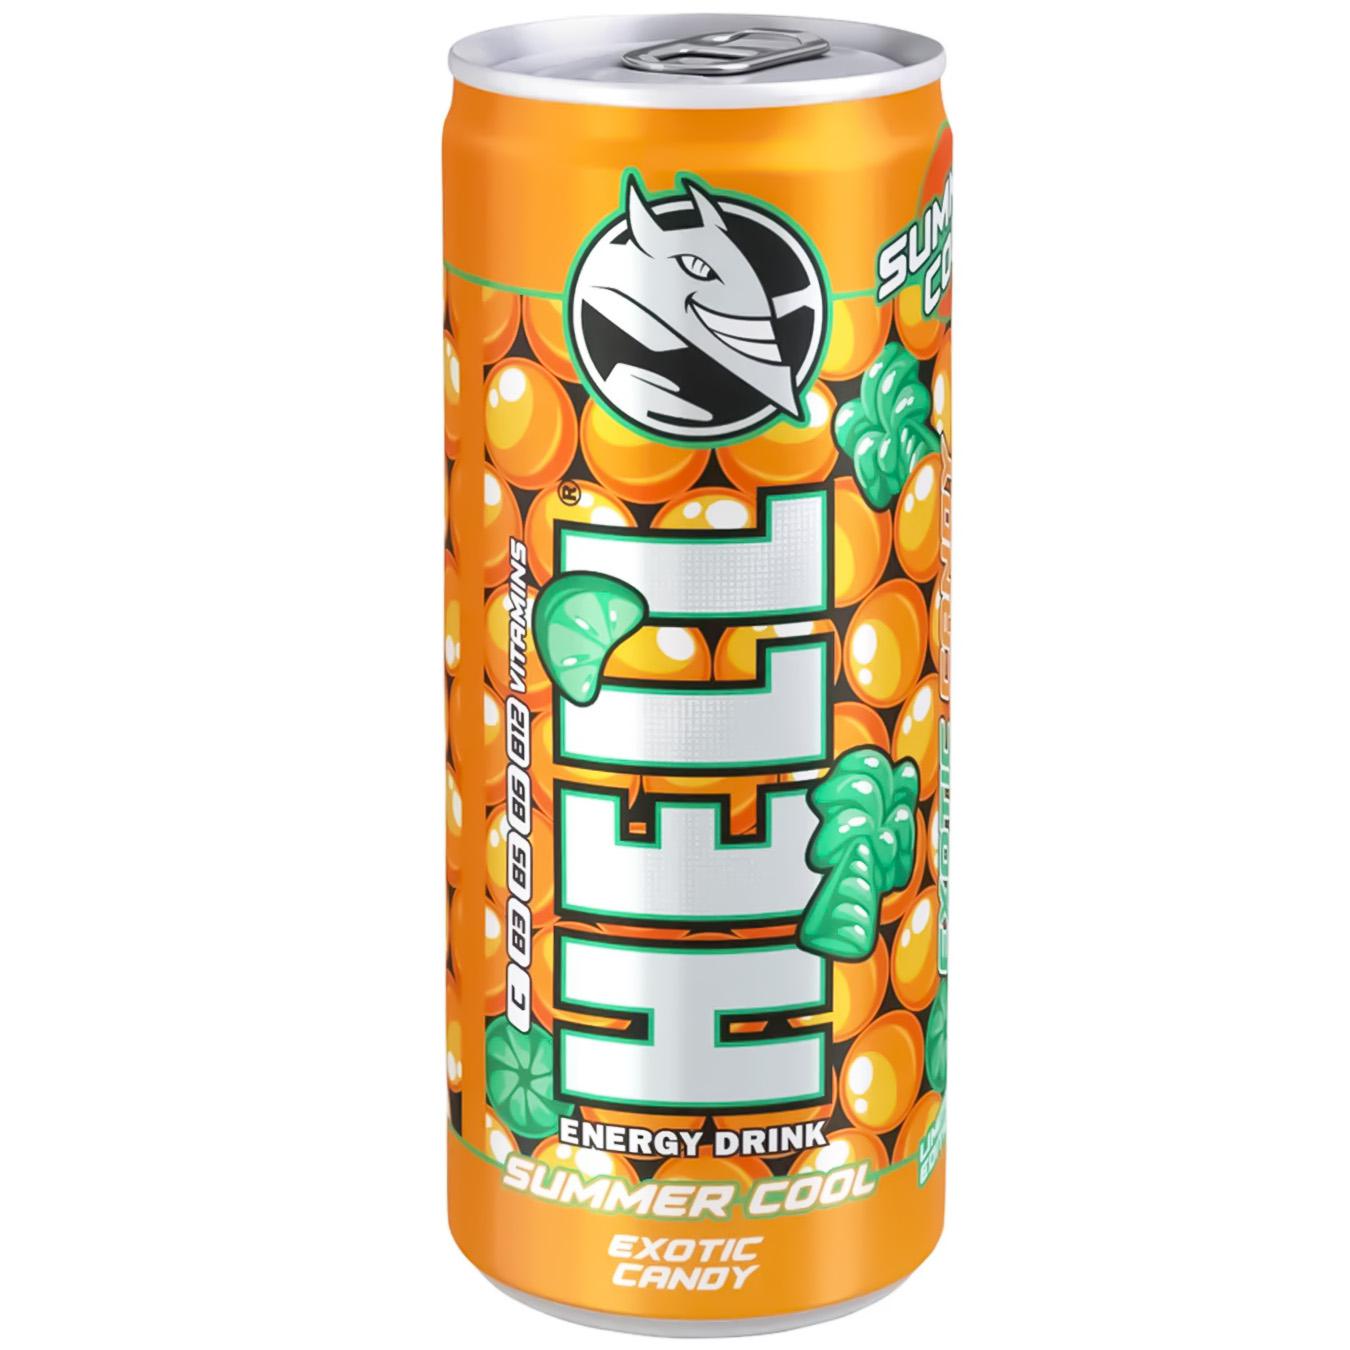 Energy drink Hell Summer Cool Exotic Candy 250 ml